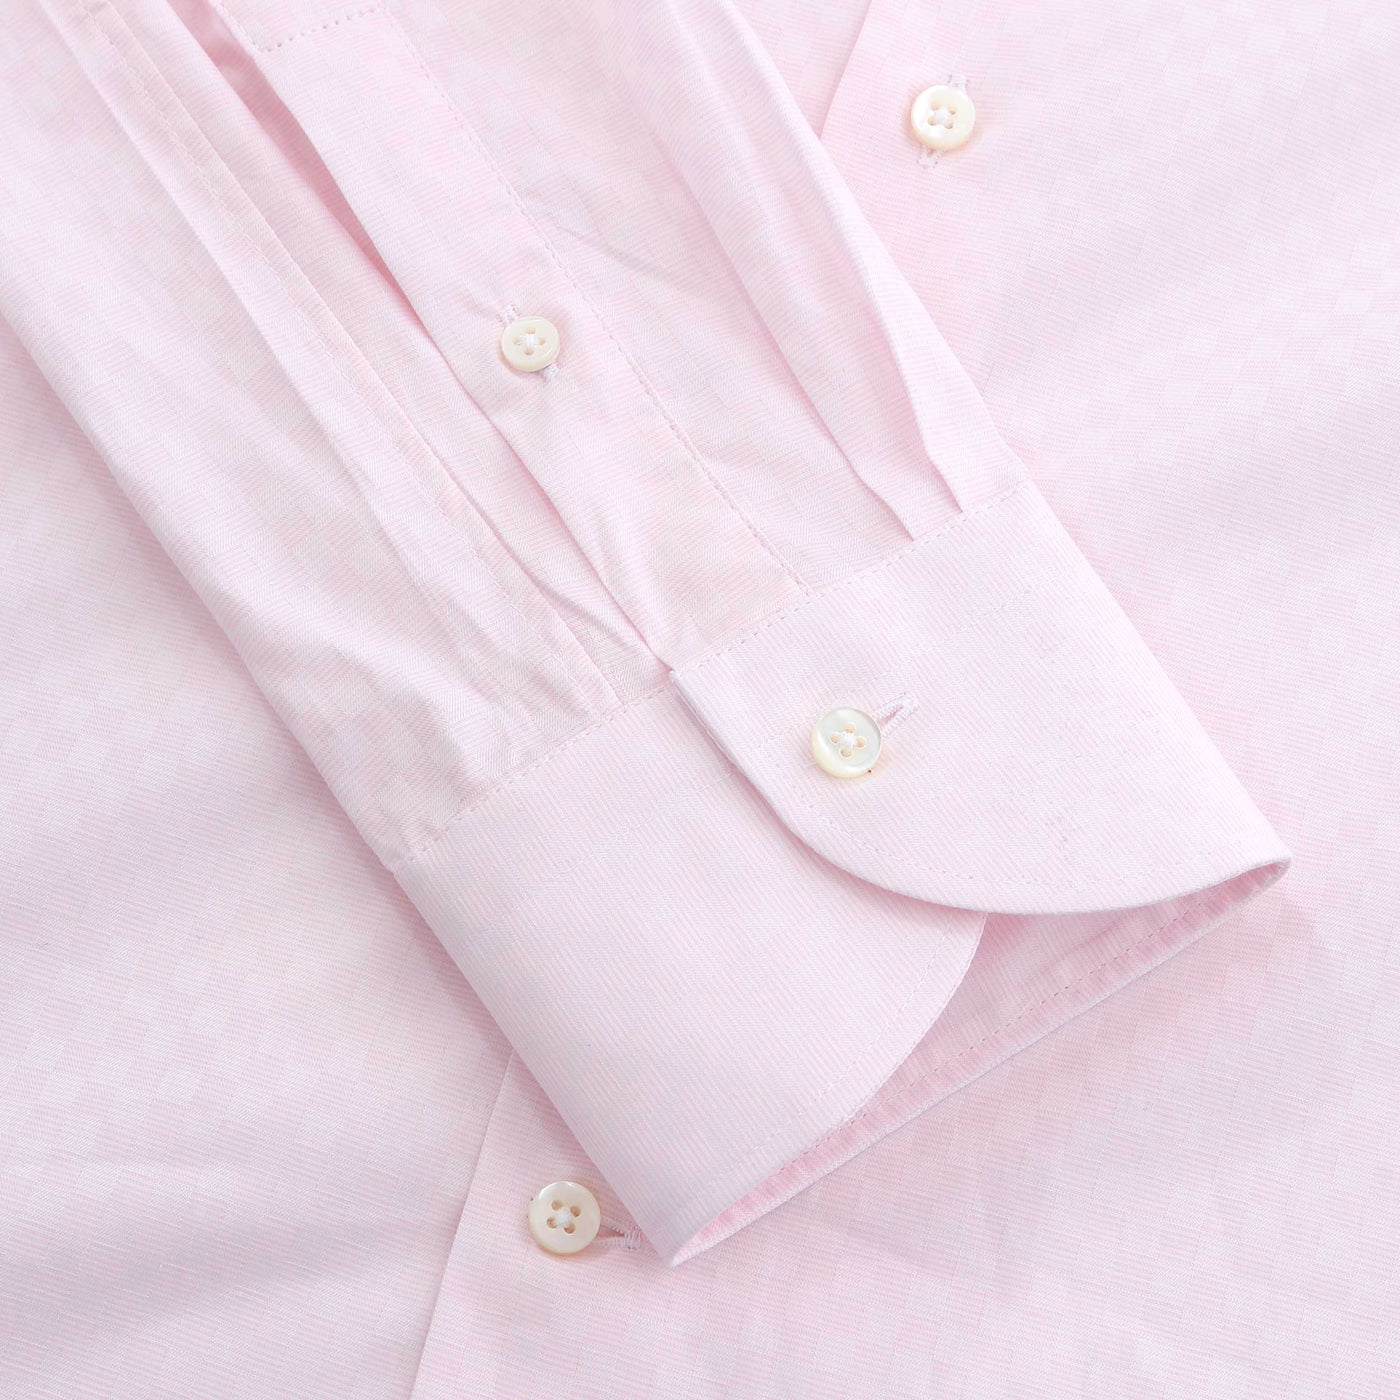 Canali Micro Check Shirt in Pink Cuff